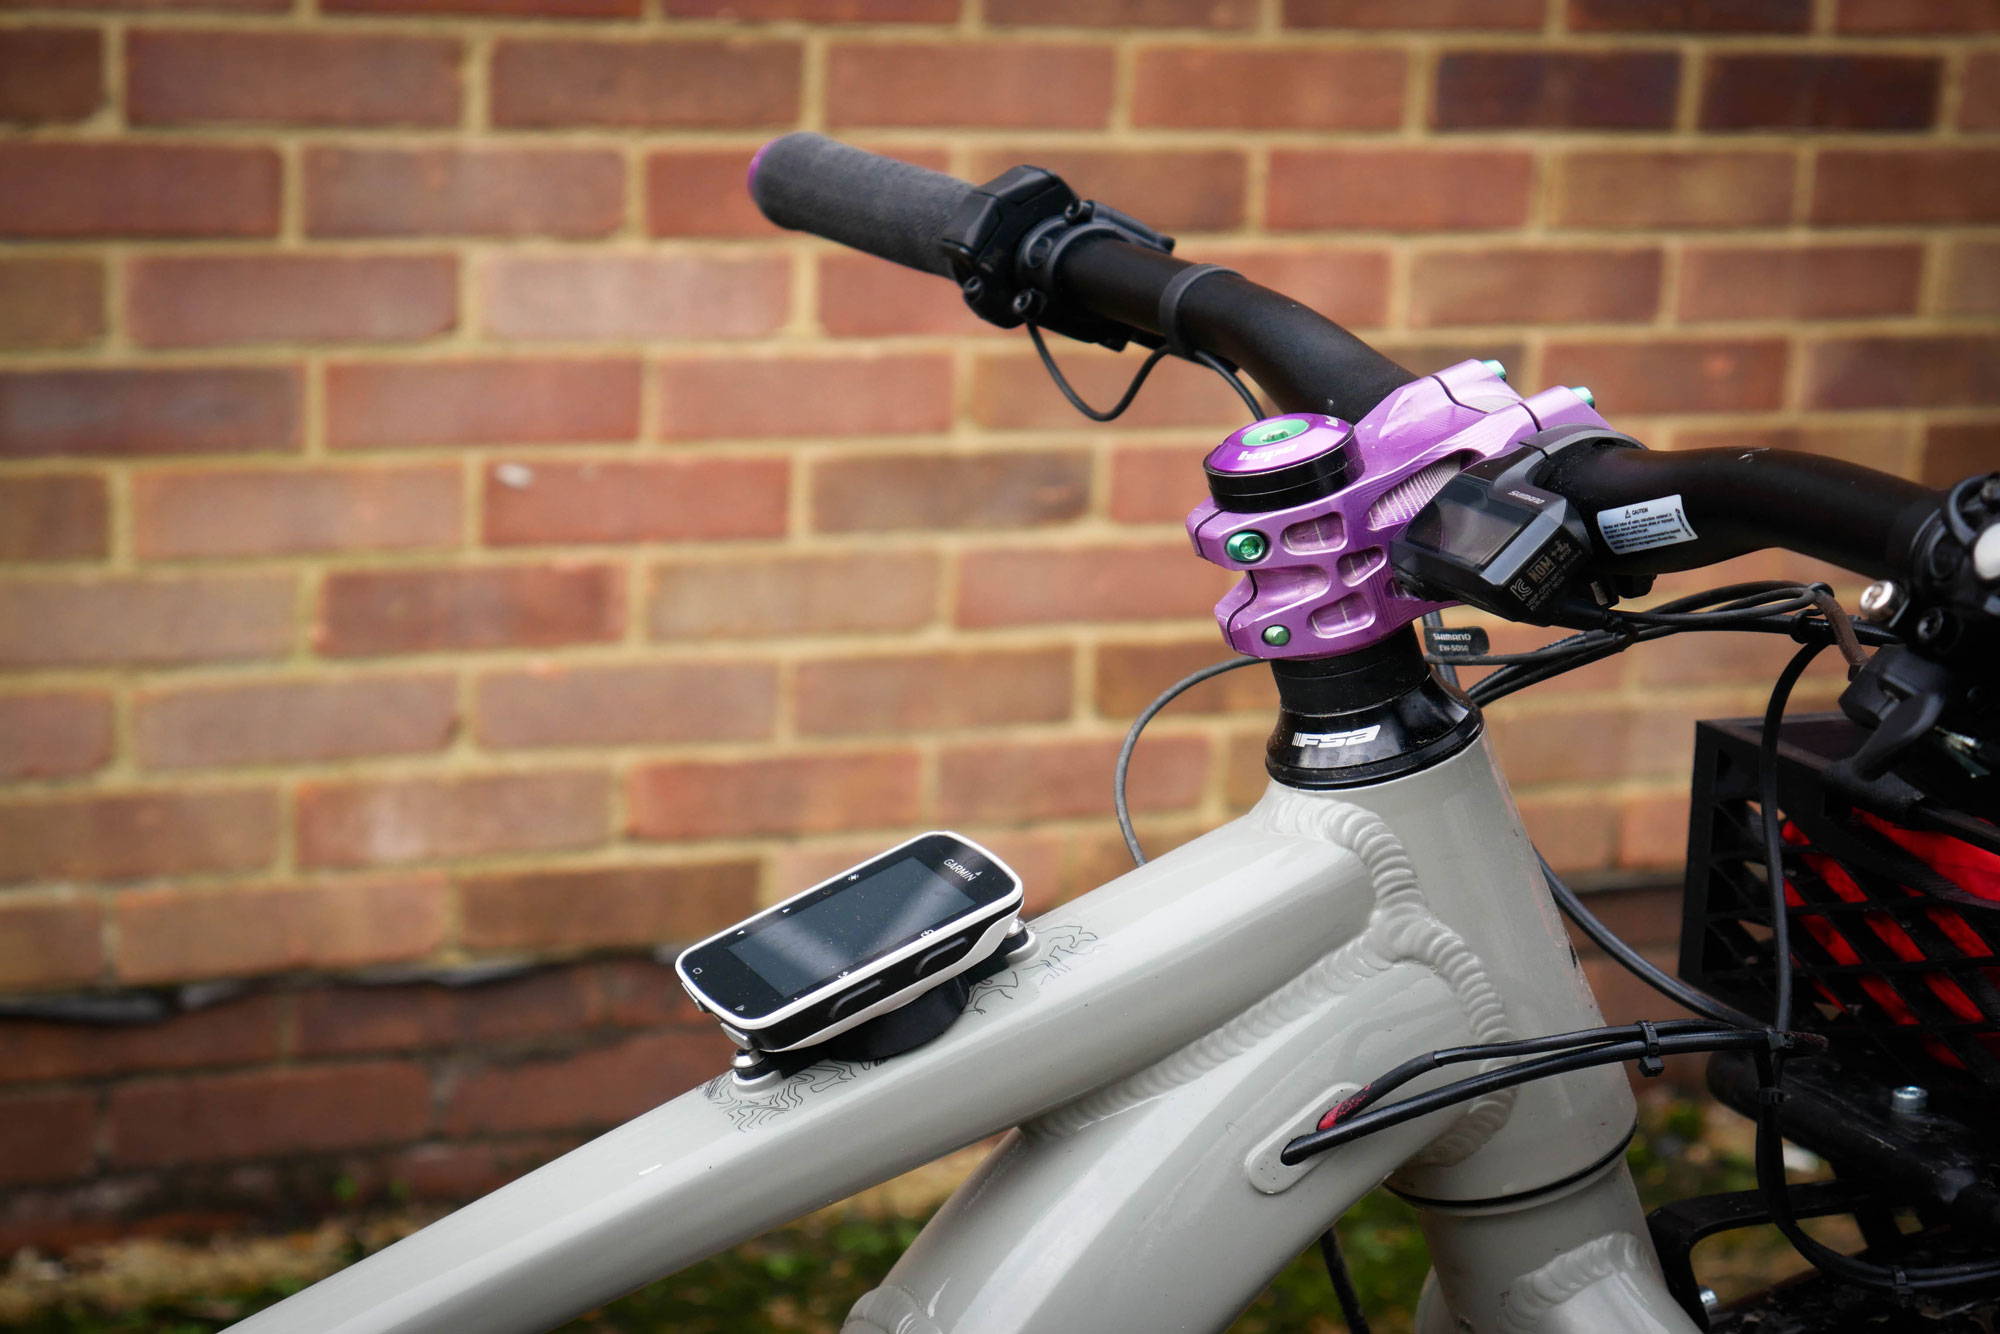 Close up of cockpit with Garmin mount and purple stem